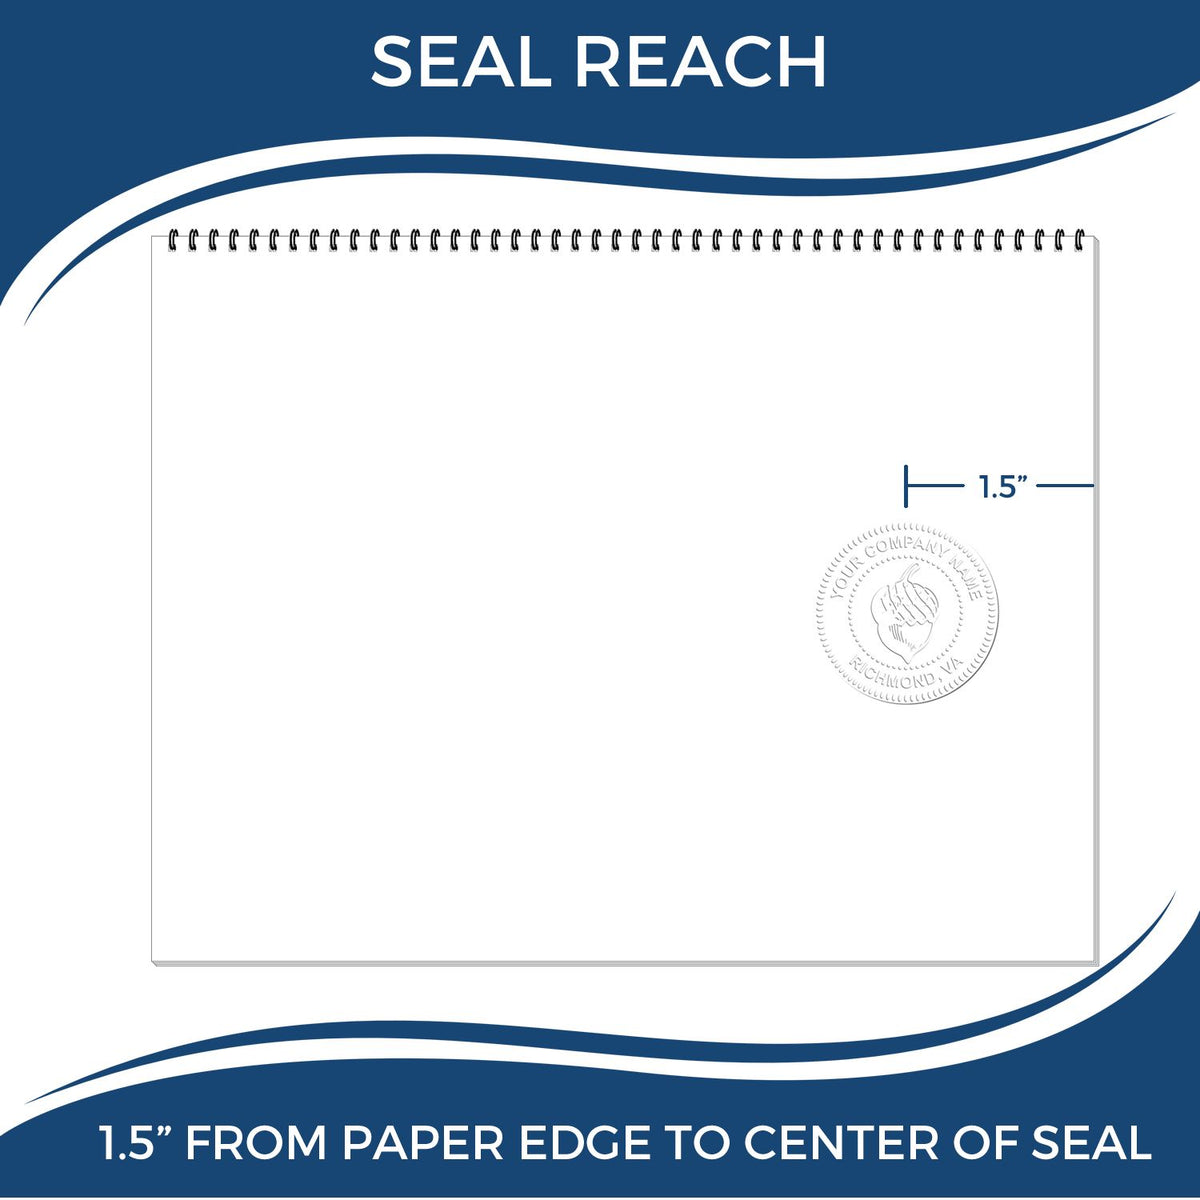 An infographic showing the seal reach which is represented by a ruler and a miniature seal image of the Handheld Alabama Land Surveyor Seal